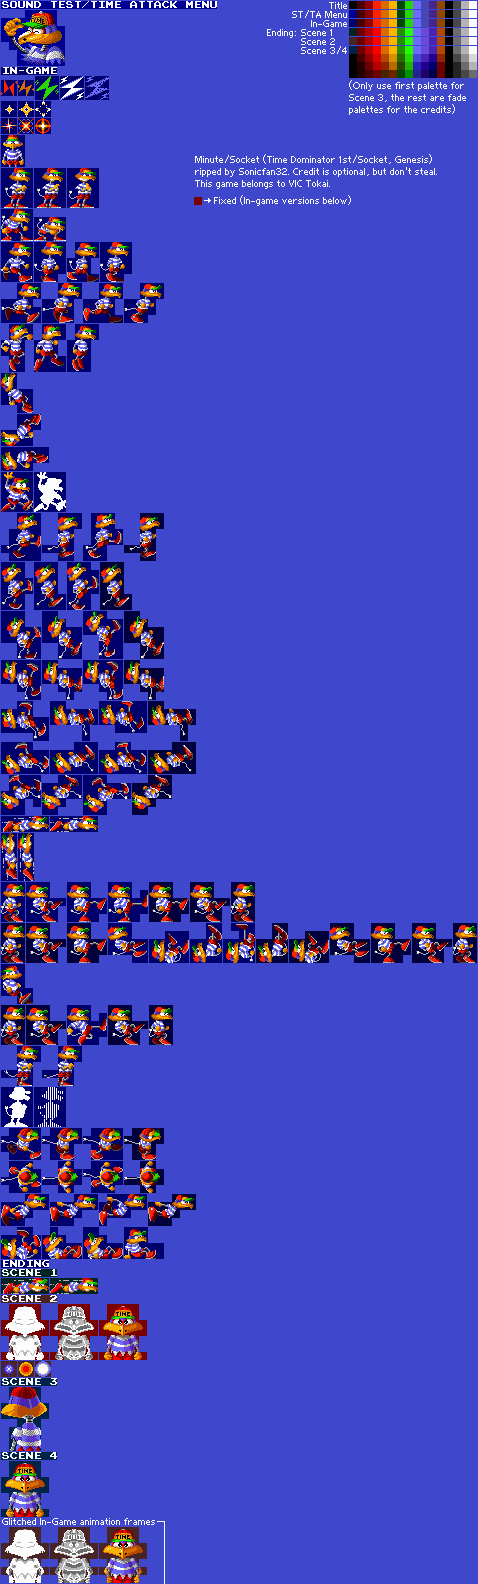 The VG Resource - Sonicfan32's sprite rippings.